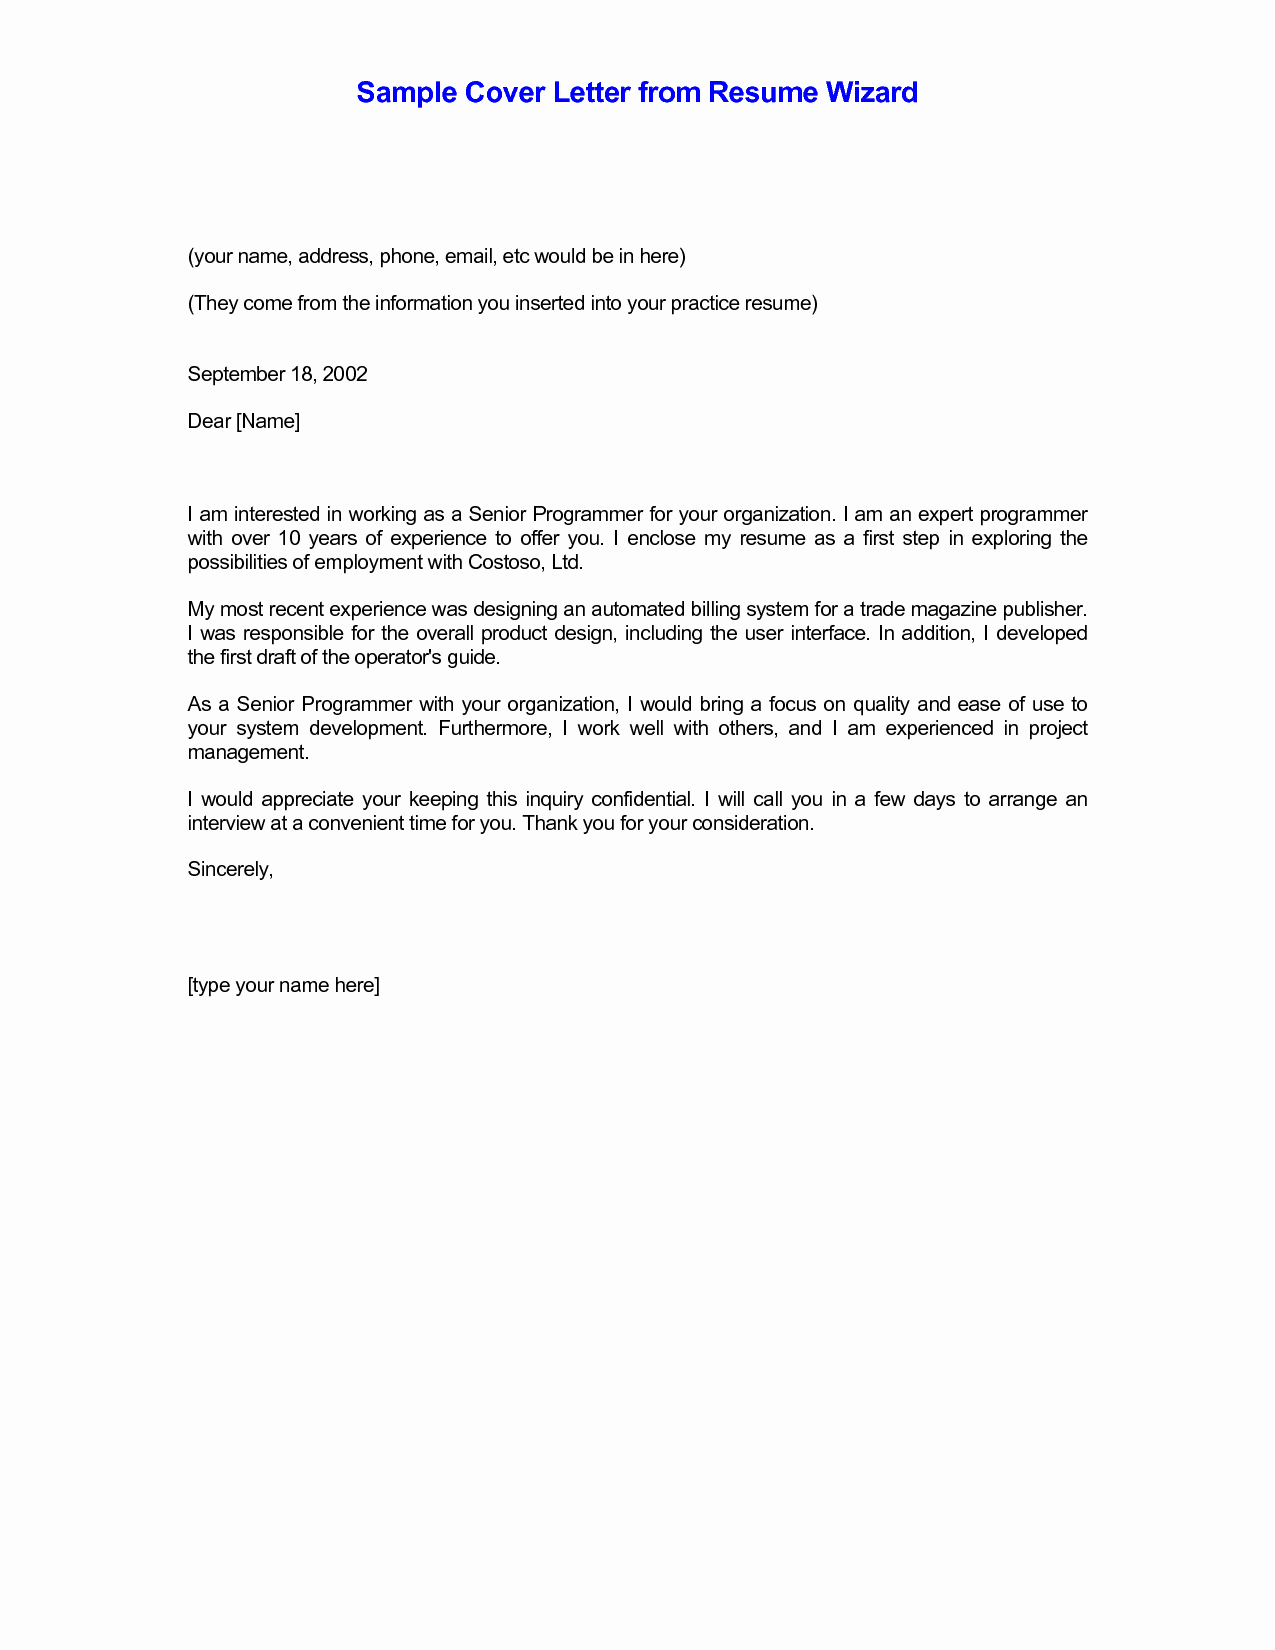 Email Cover Letter for Resume New Email Resume Cover Letter Examples Sample Cover Letter for